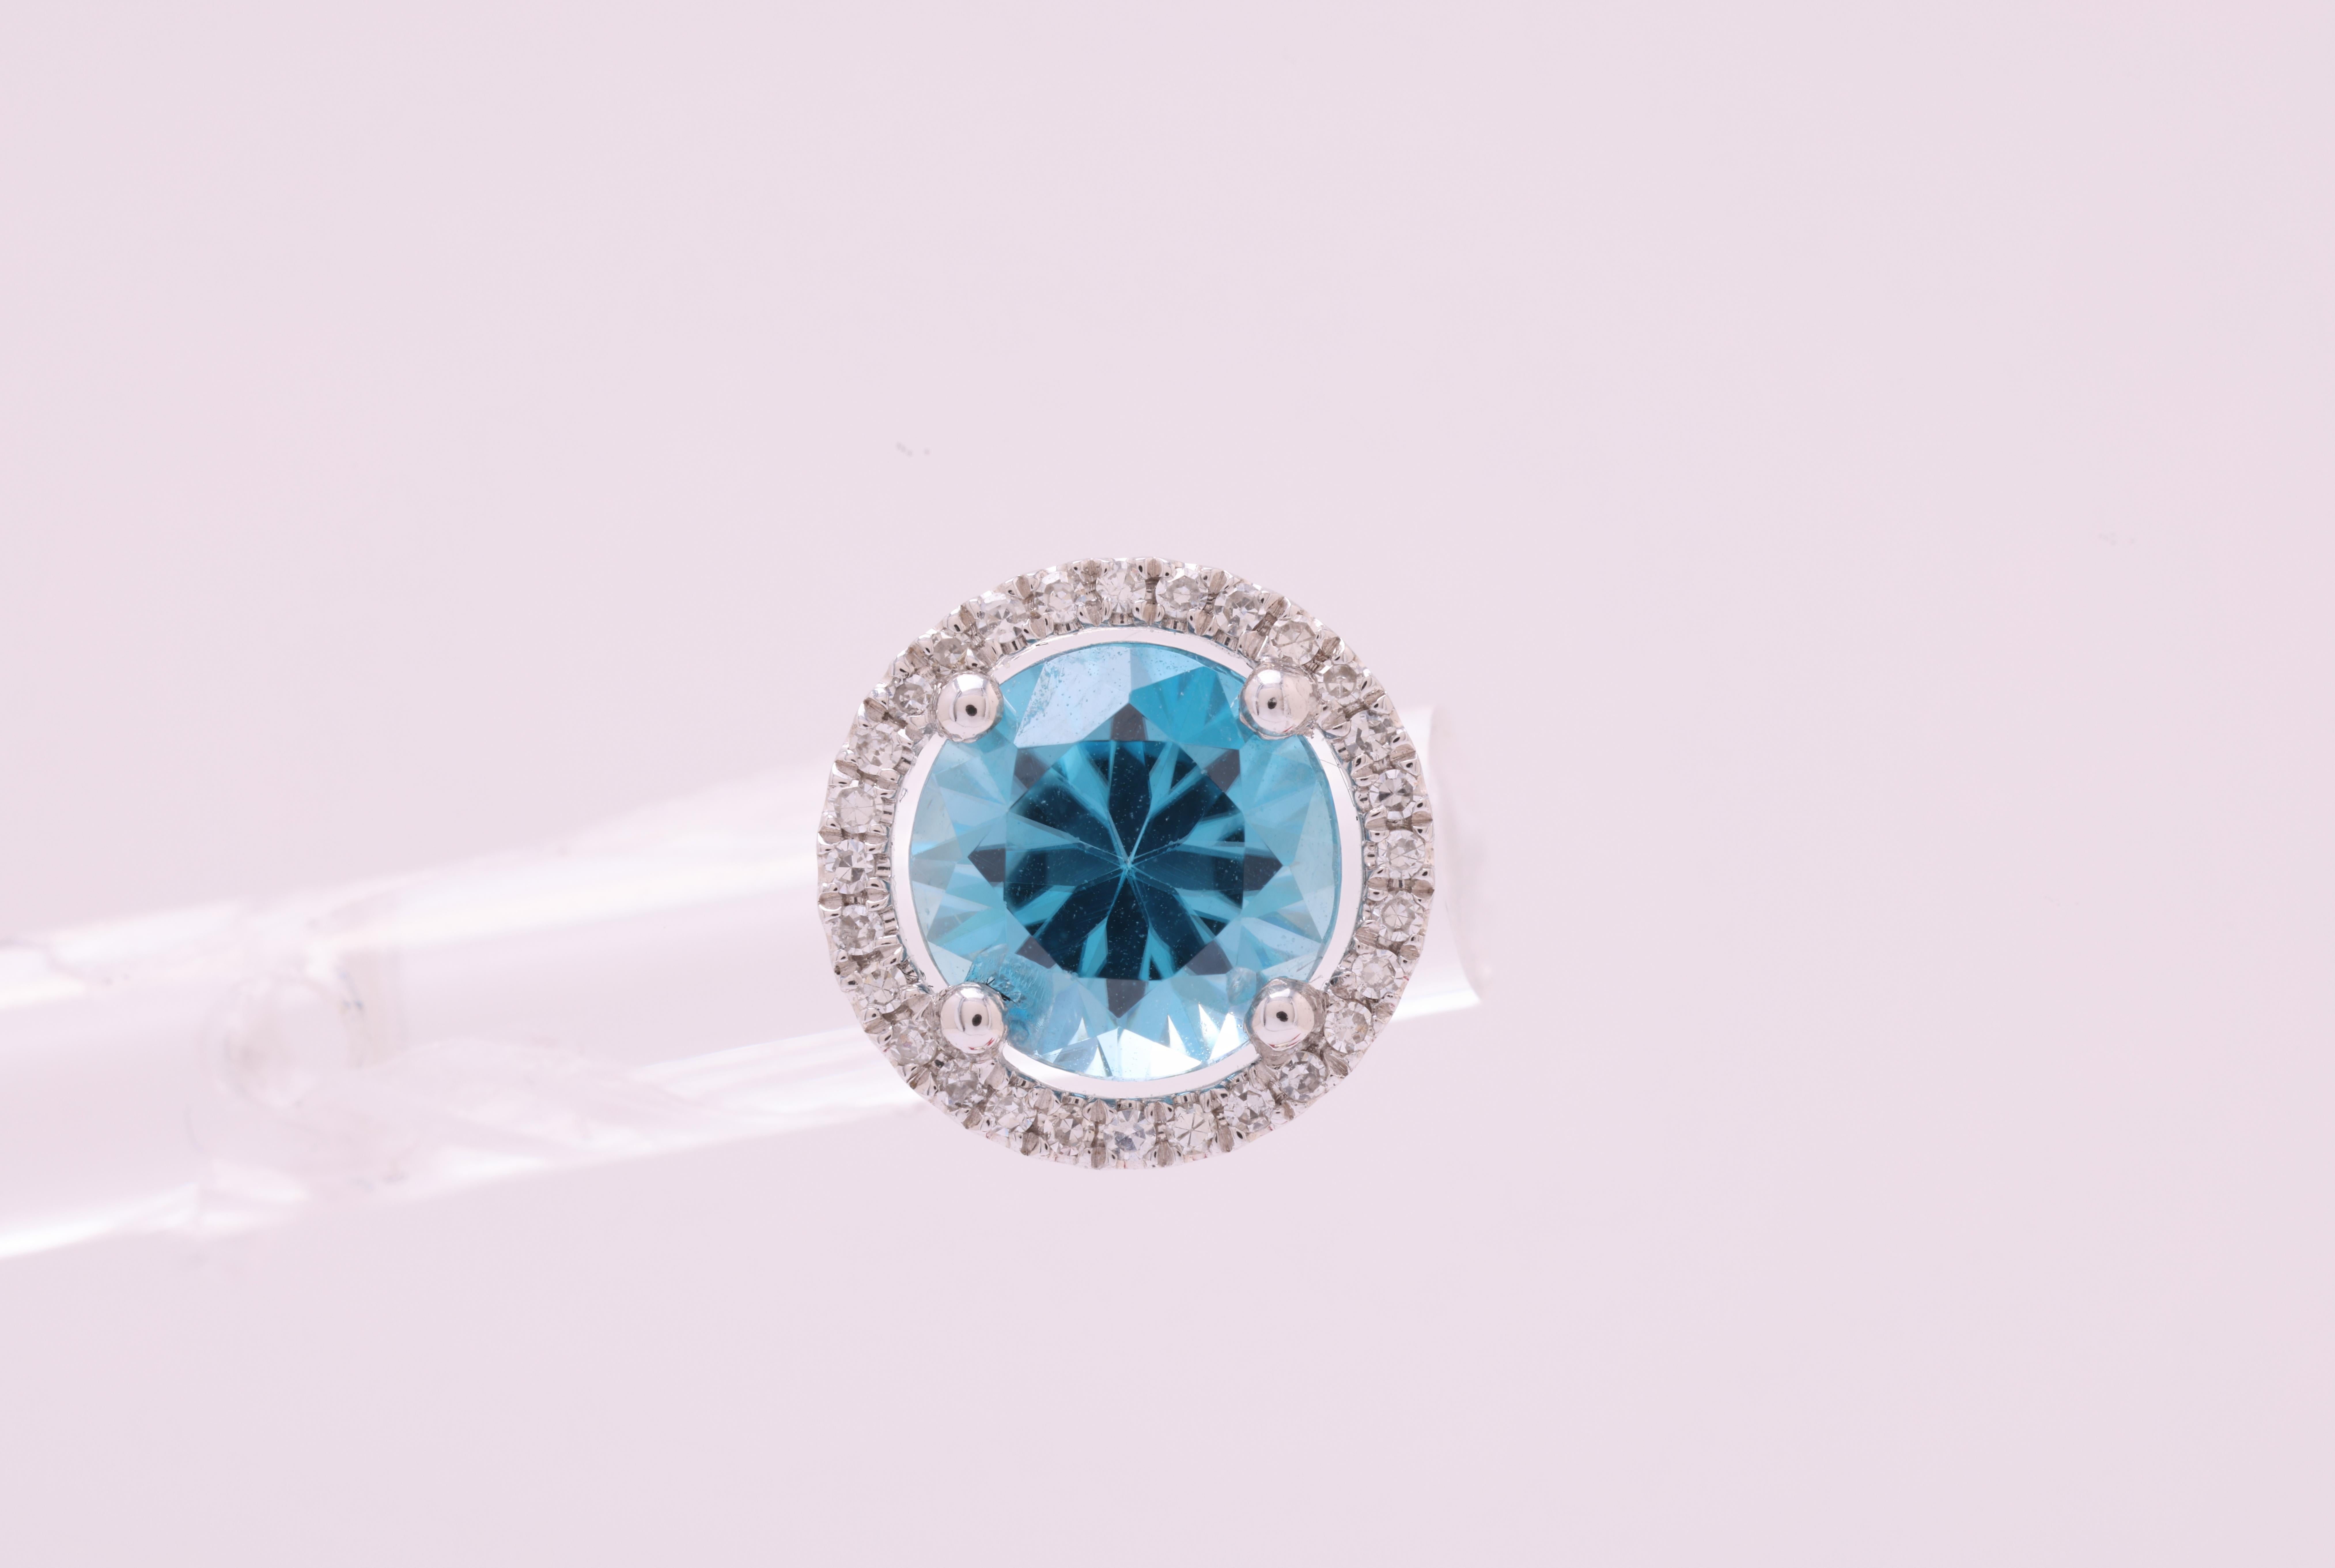 Adorn yourself with timeless elegance and unparalleled beauty with our magnificent stud earrings. These exquisite jewels are a true embodiment of luxury, featuring a pair of stunning round Blue Zircon stones, totaling an impressive 2.99 carats.